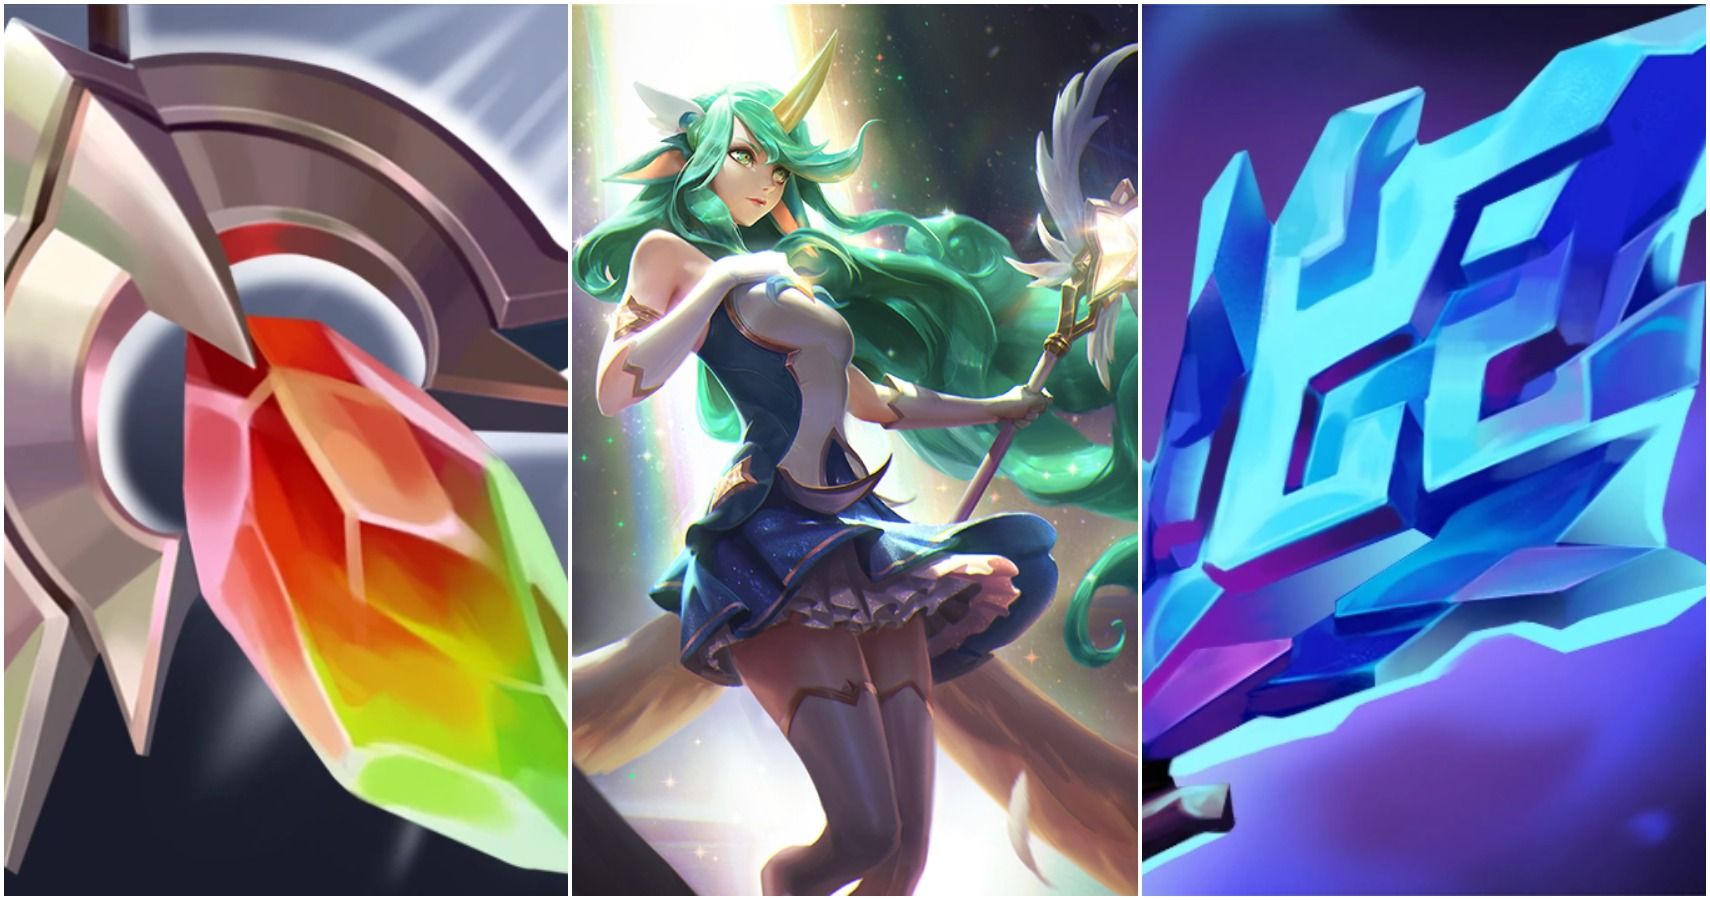 Soraka next to two support items, Shard of True Ice and Redemption